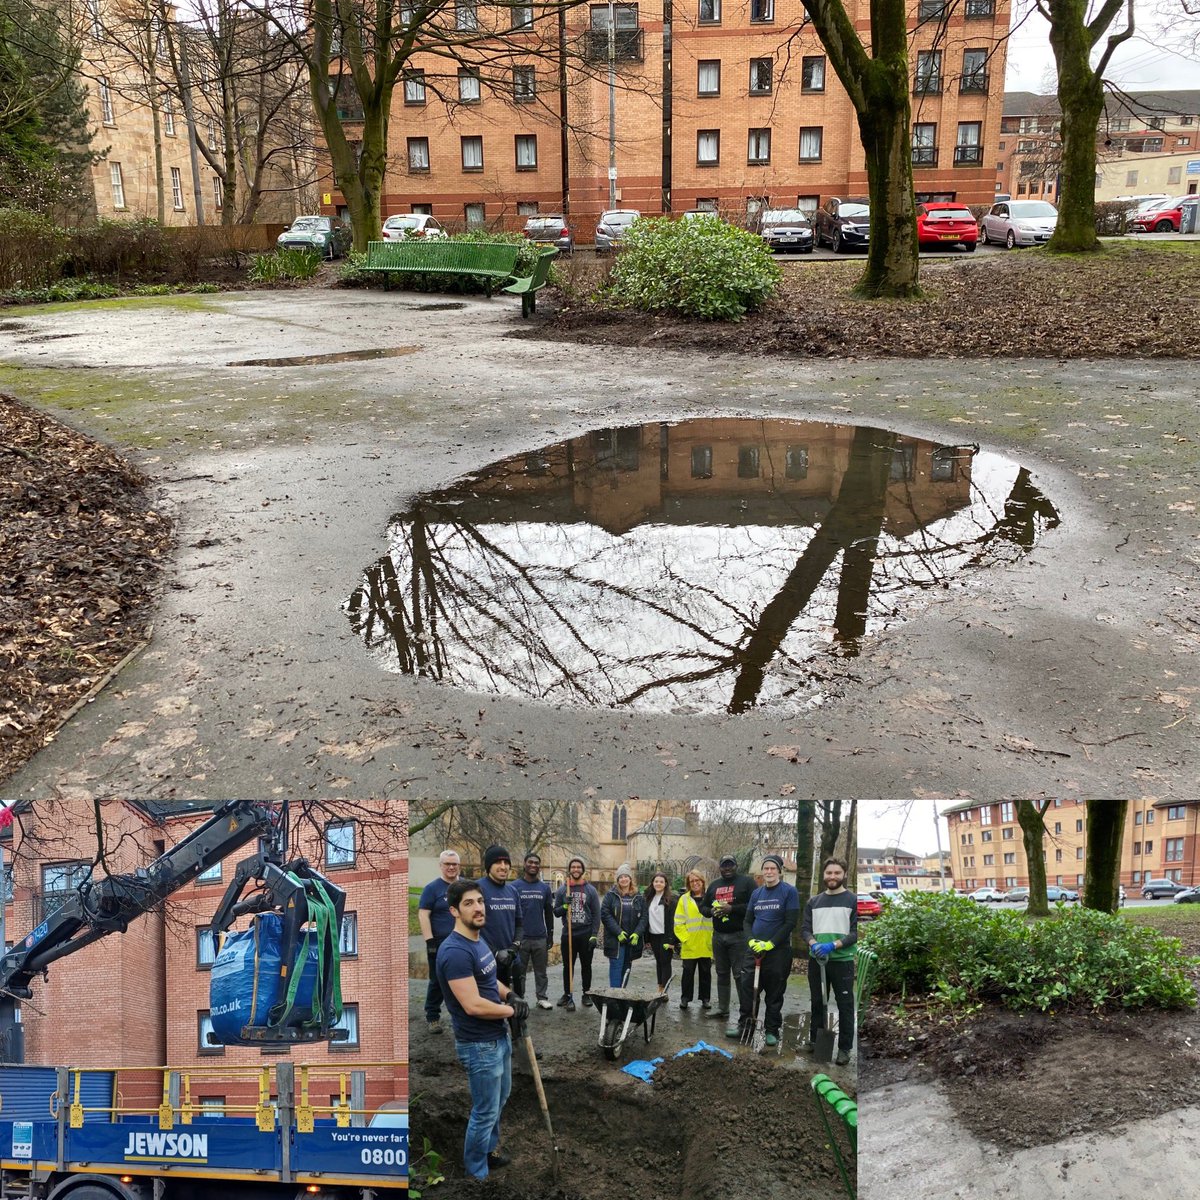 Huge thanks to the brilliant volunteers #JPMorganChase @jpmorgan @Chase who joined us at Cherry Park today! Shrubs pruned, paths edged & #RainGarden installed to reduce path flooding!💦🌸 Materials & equipment funded by players of the #NationalLottery #TogetherForOurPlanet fund🌍